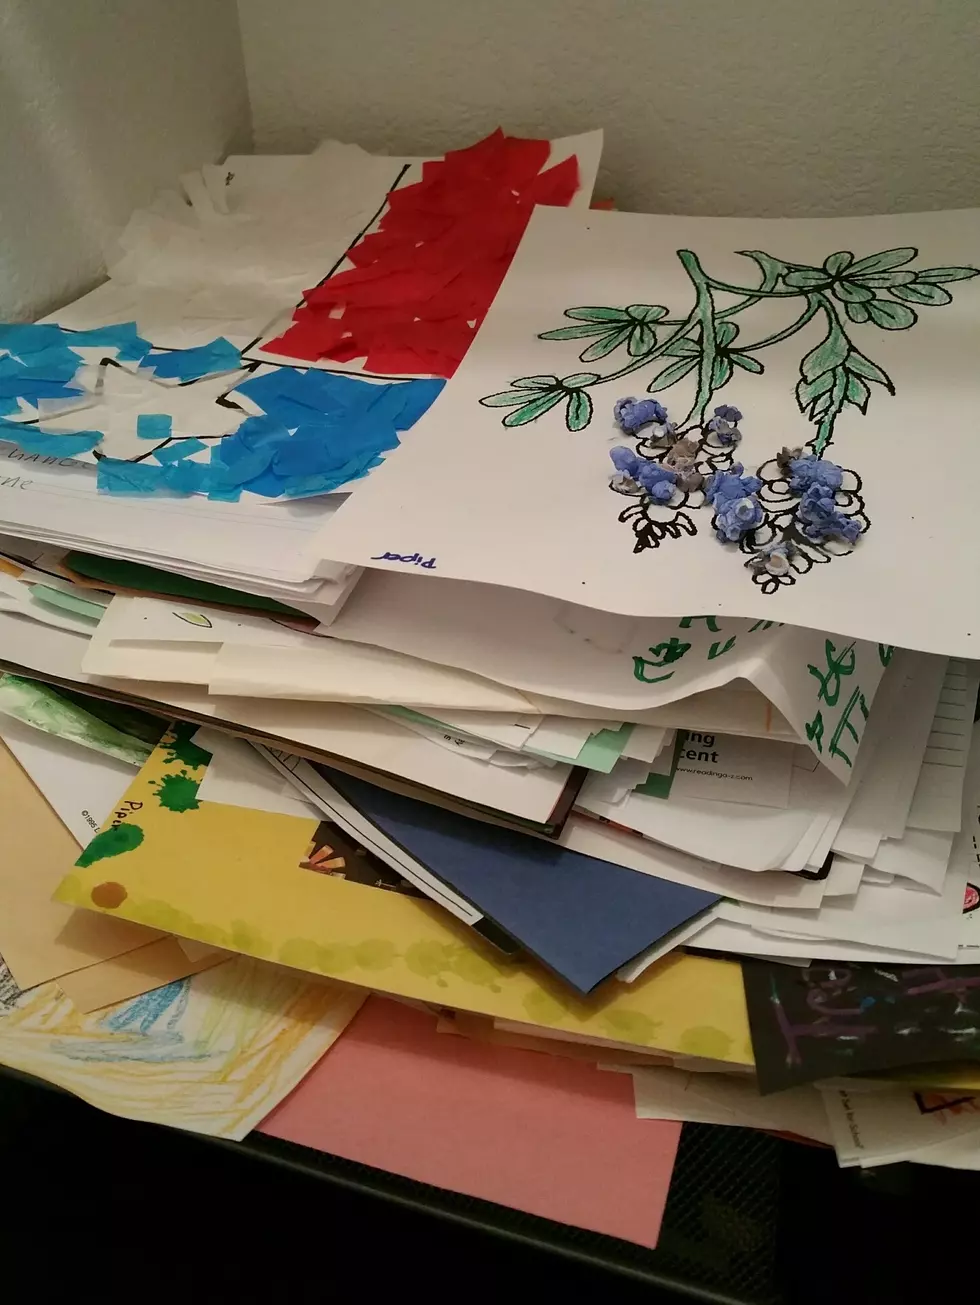 The School Year is Ending.  Do You Toss The Kids’ Artwork?